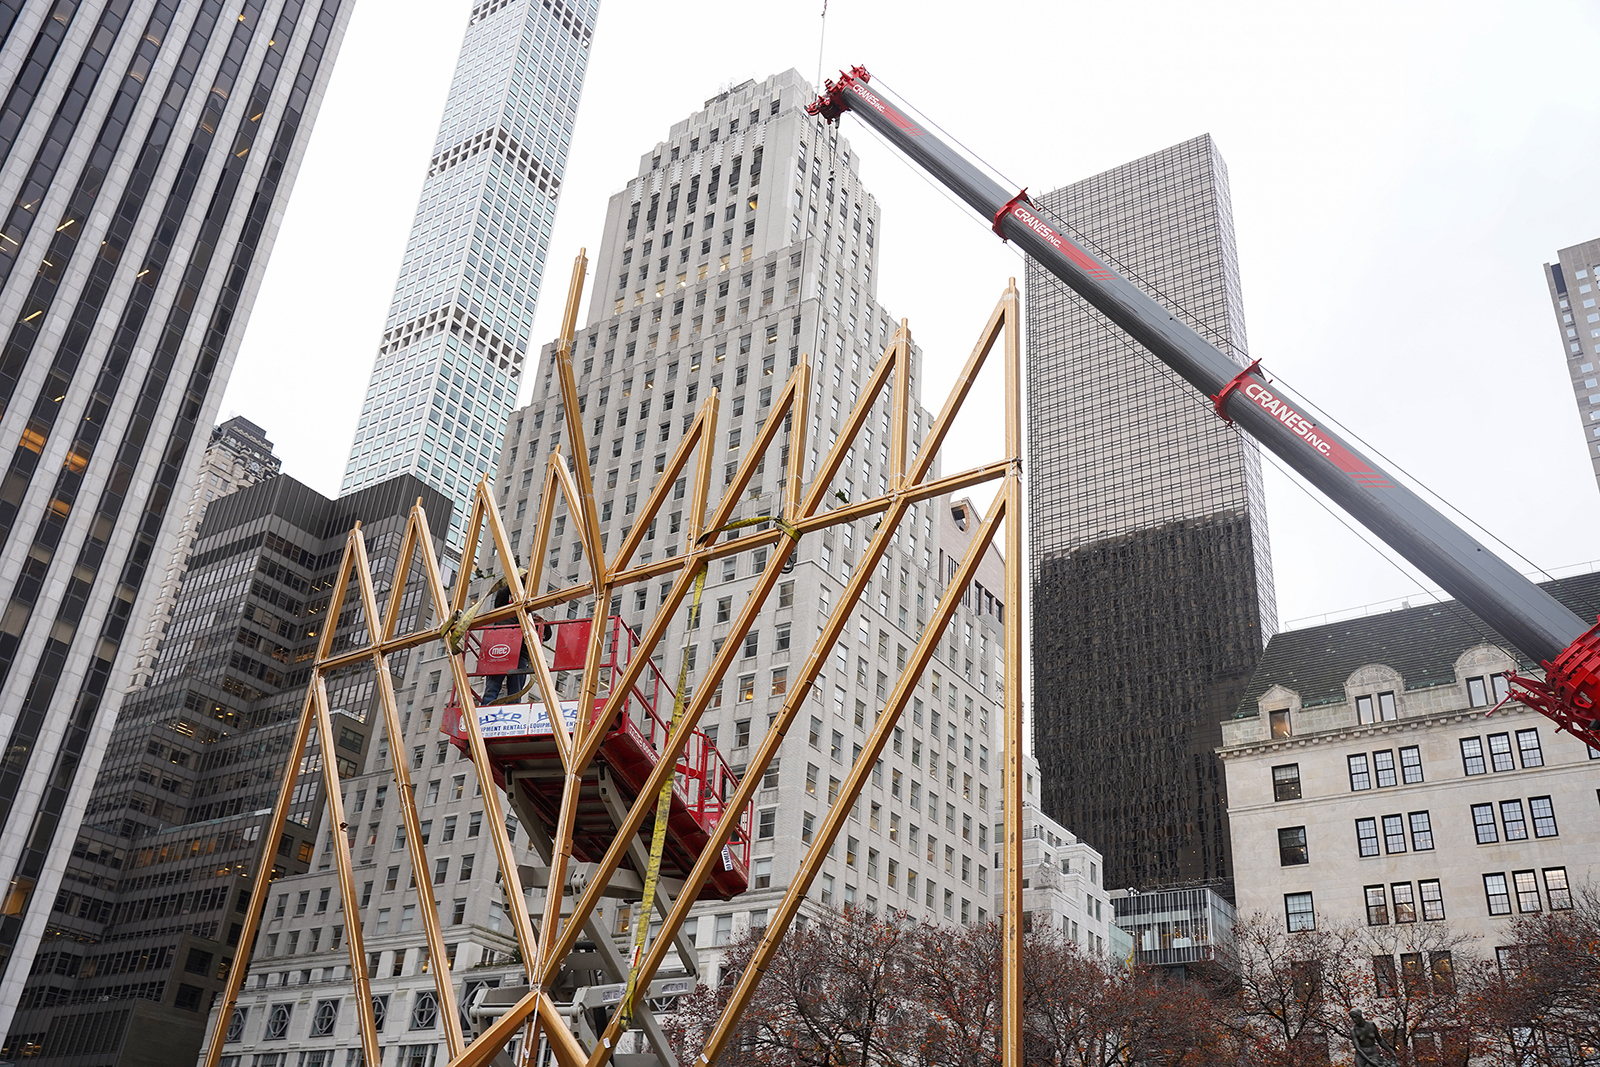 A 36-foot menorah is assembled outside the Plaza Hotel in New York City on Dec. 15, 2022, ahead of the start of Hanukkah. Photo by Muli Berger/Lubavitch Youth Organization